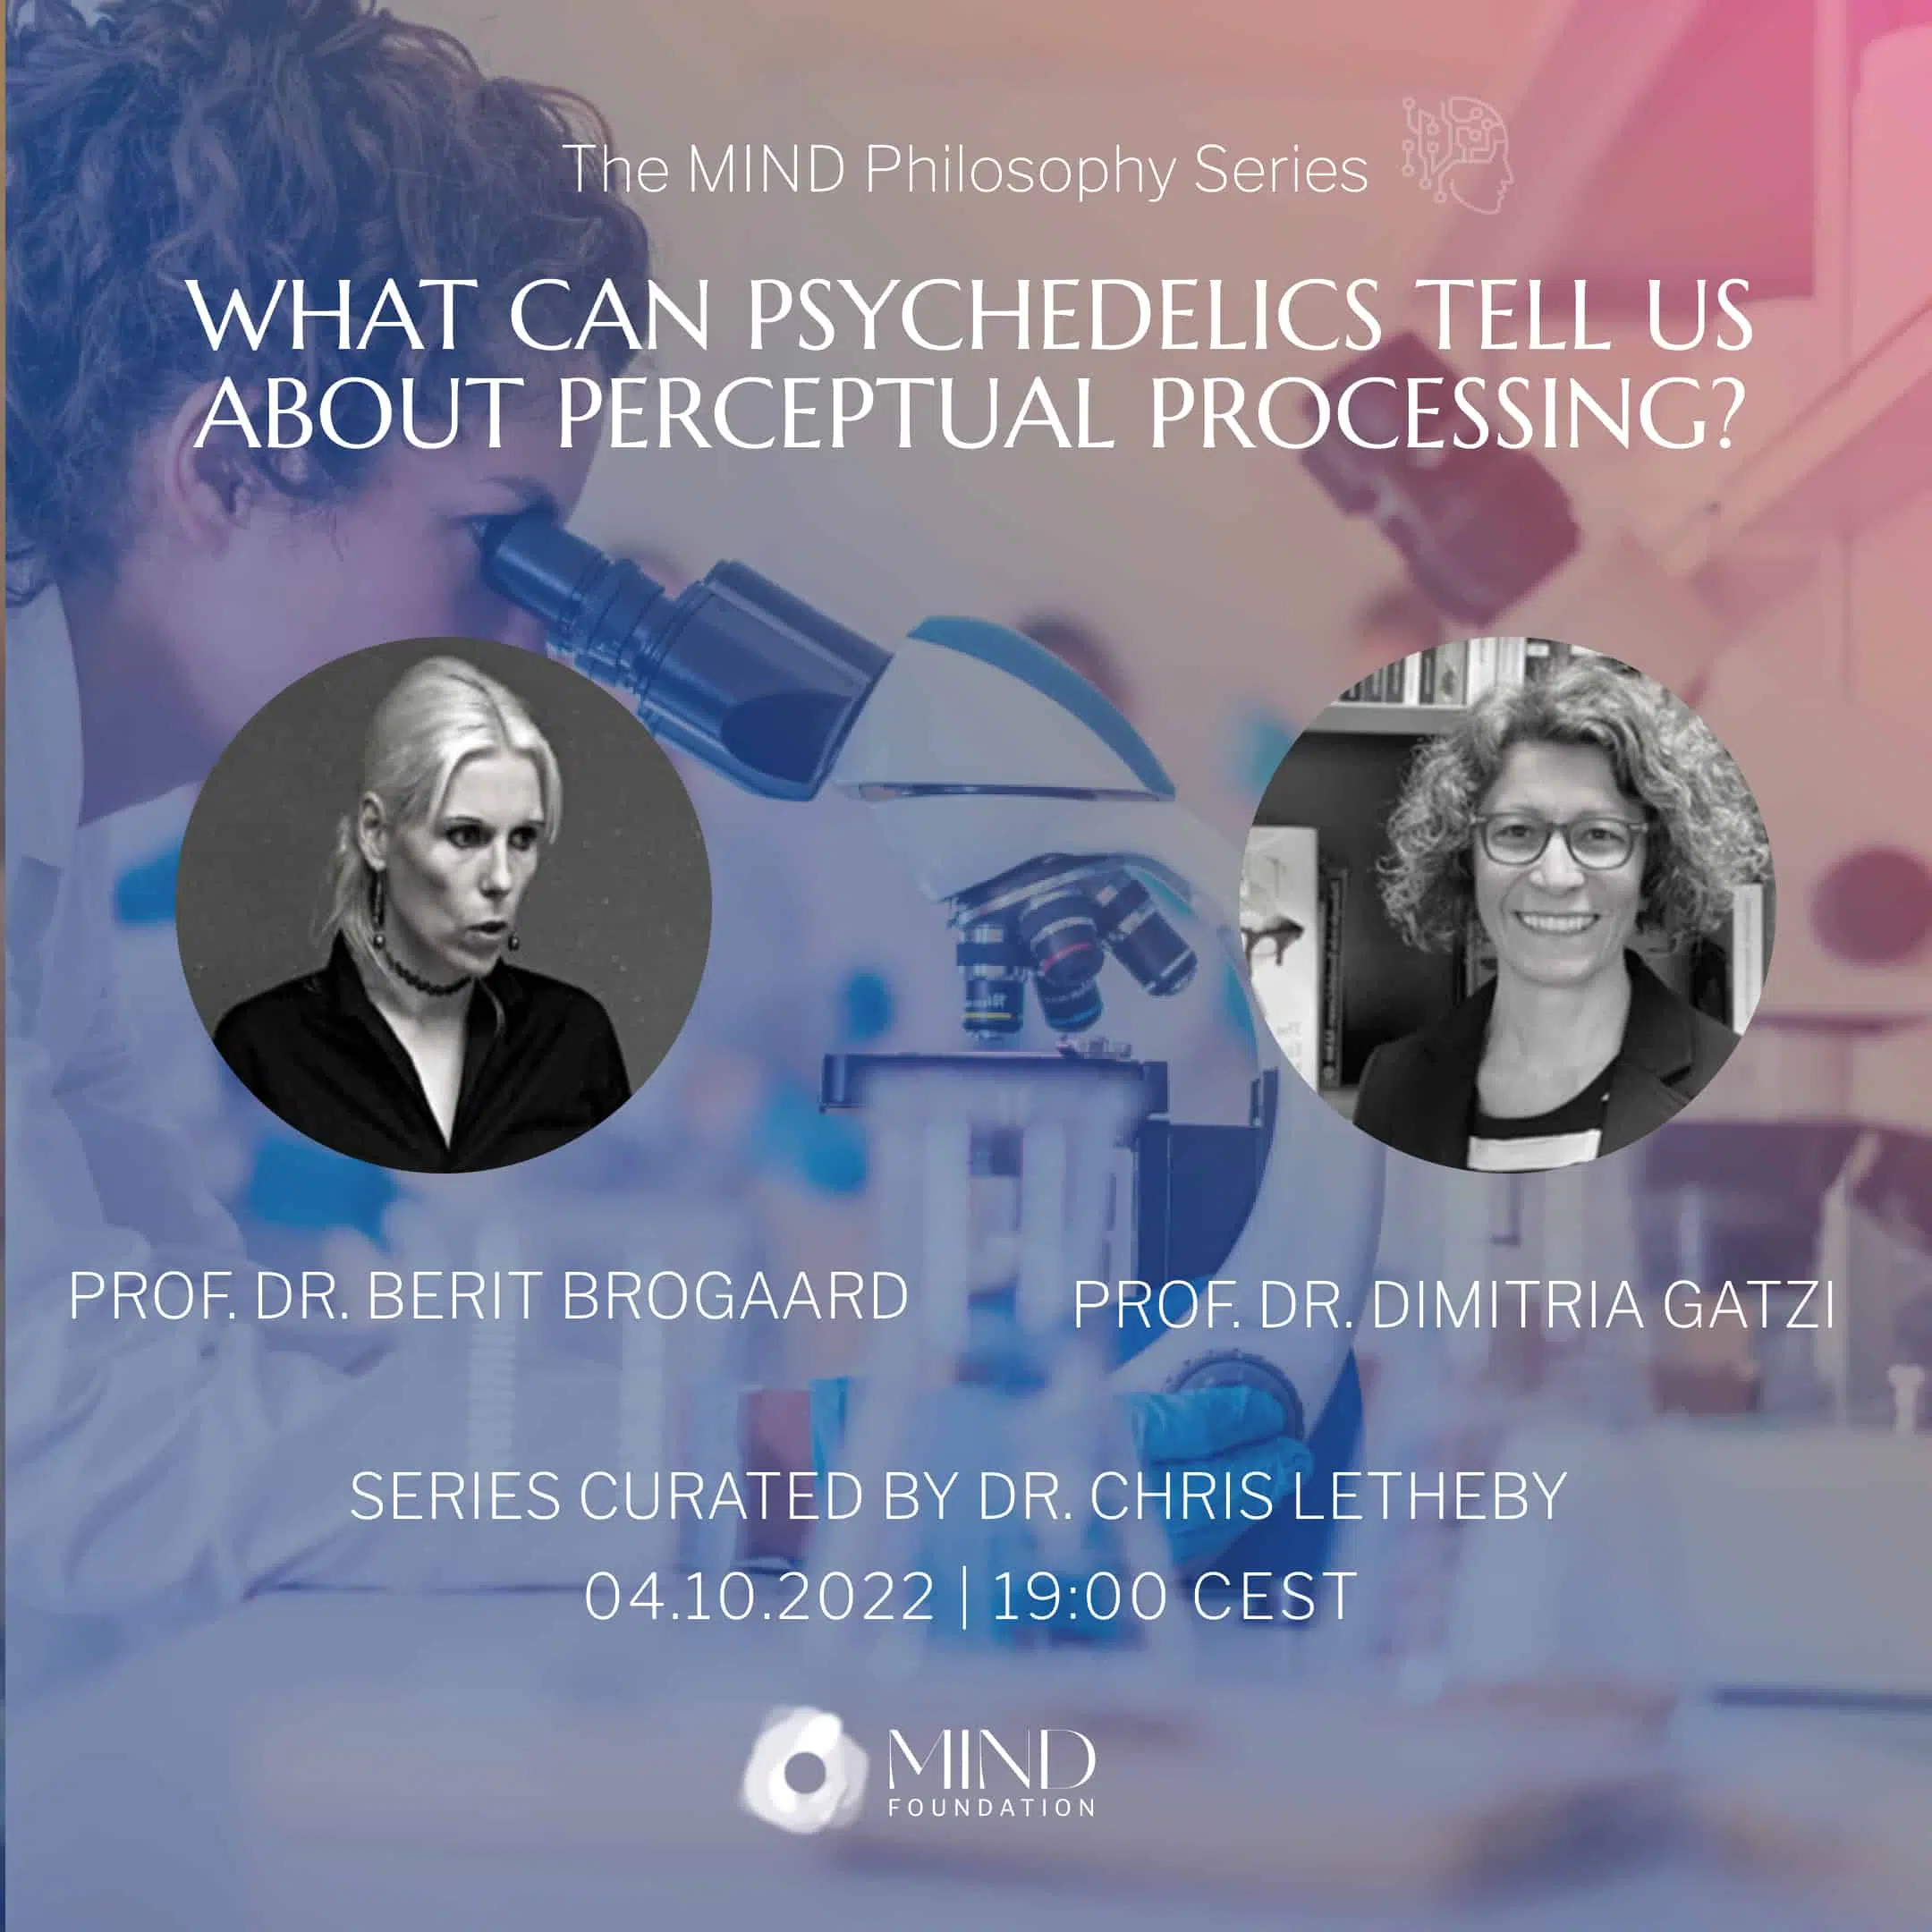 Prof. Dr. Dimitria Gatzi and Prof. Dr. Berit Brogaard – What can psychedelics tell us about perceptual processing?